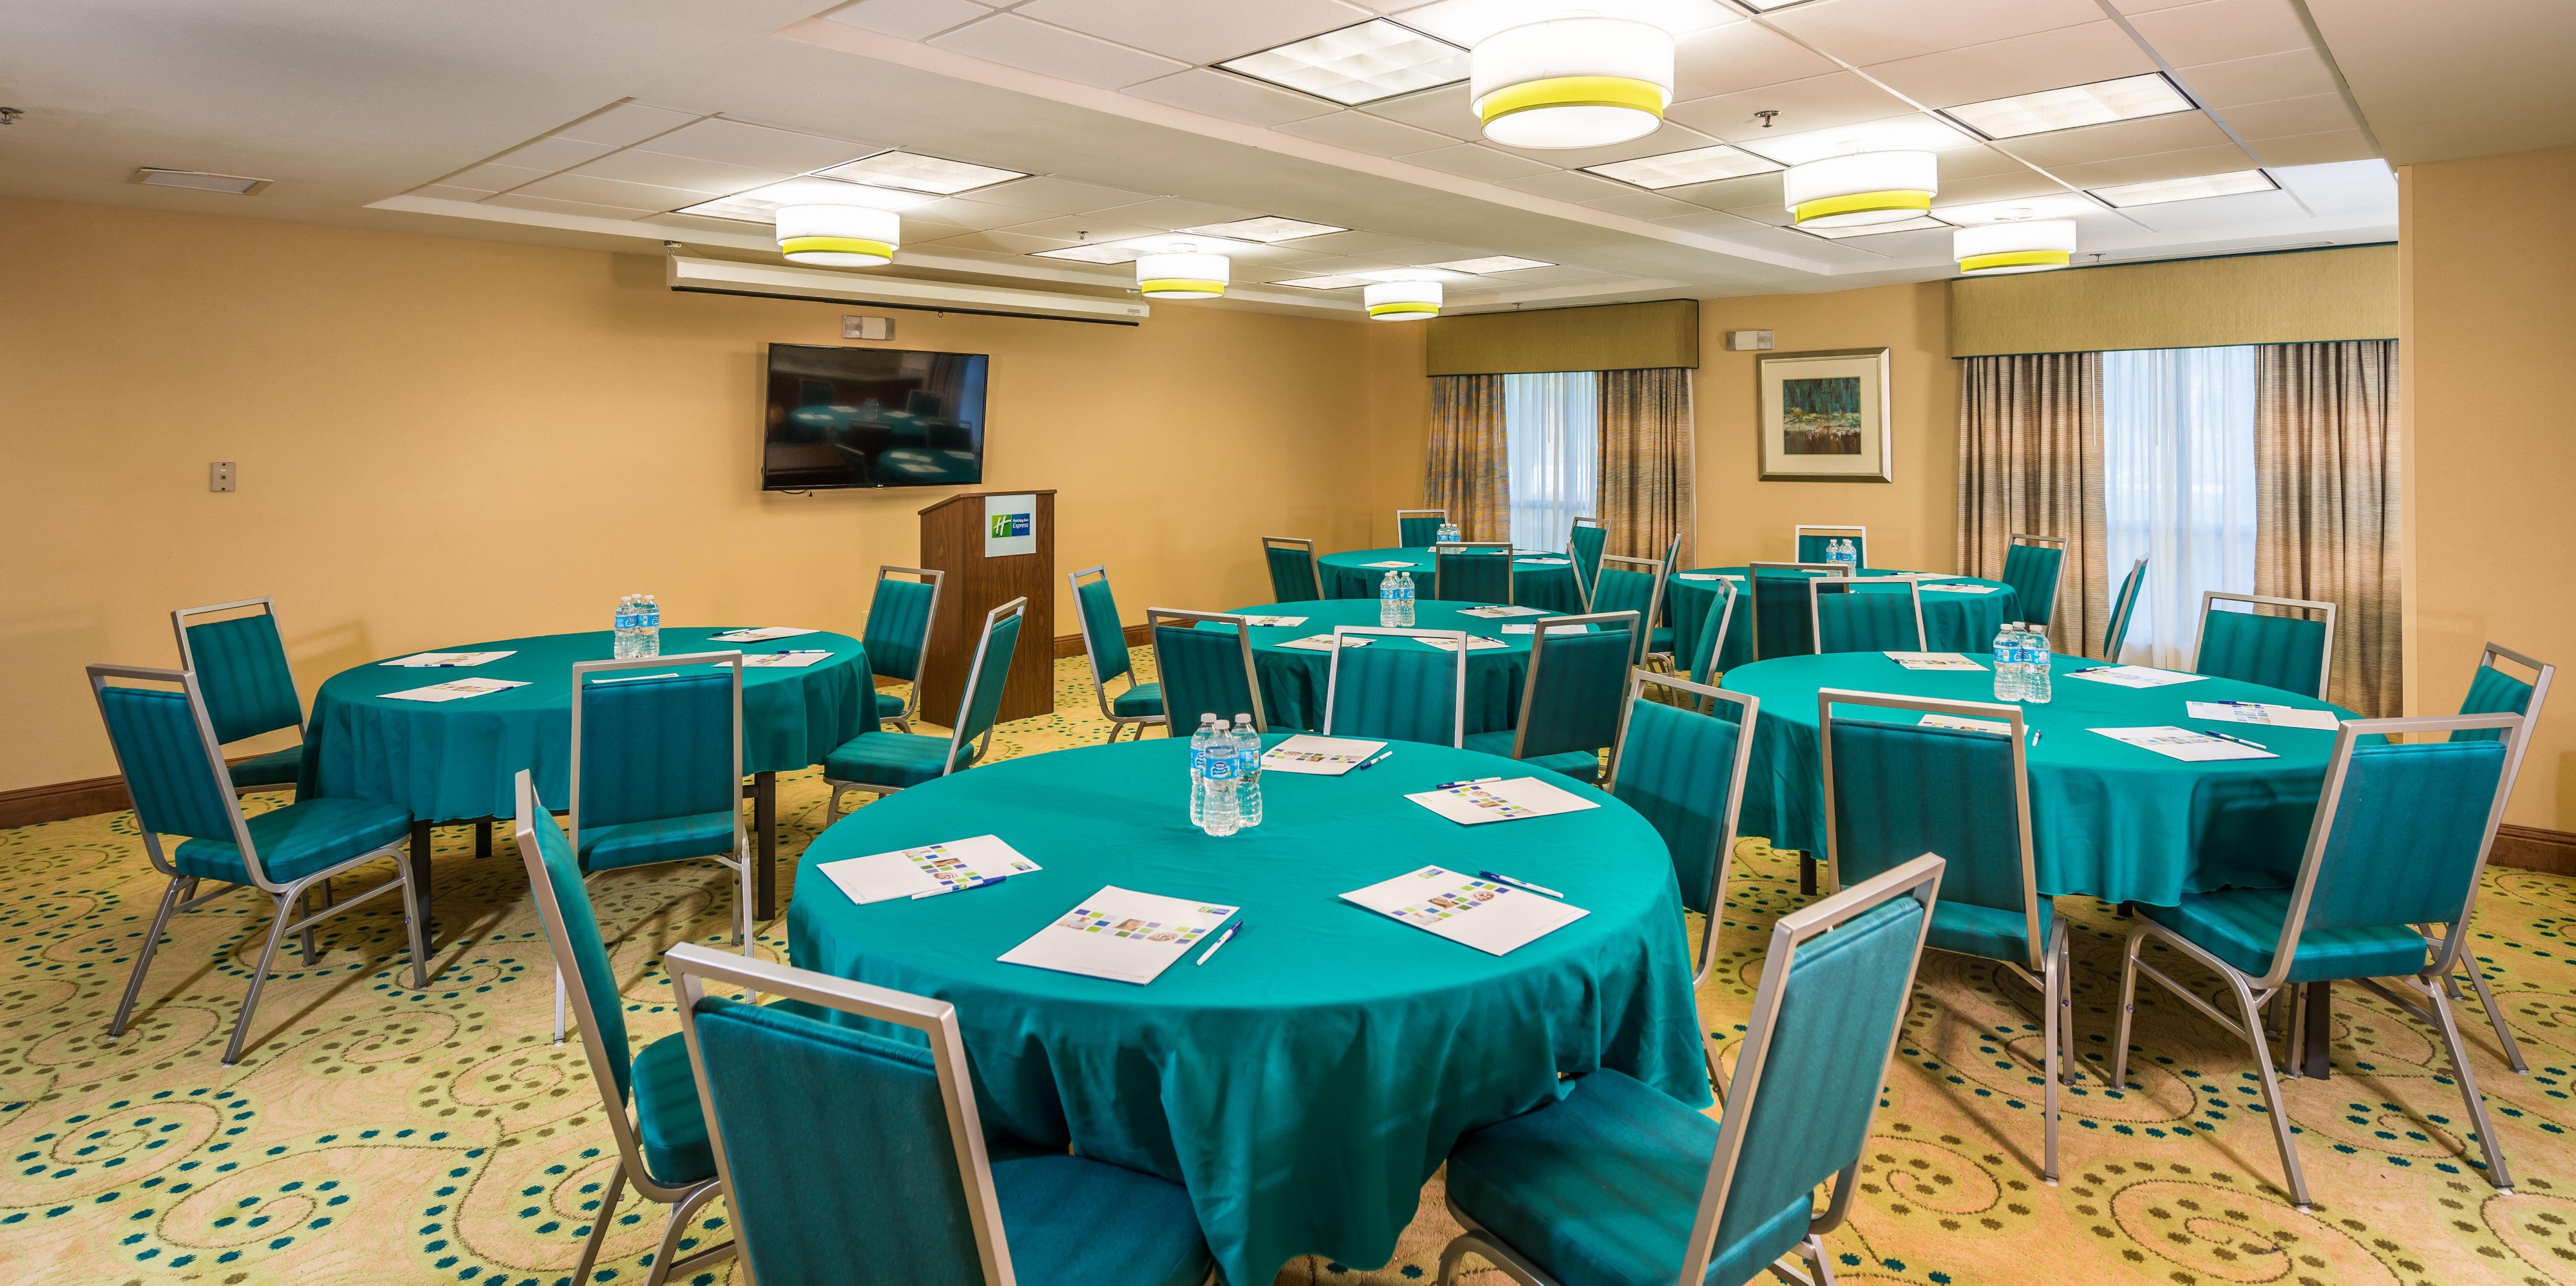 Why take your meetings offsite when you can enjoy the convenience of hosting your meeting in our conference space that can accommodate up to 30 people with various setups to accommodate your needs?